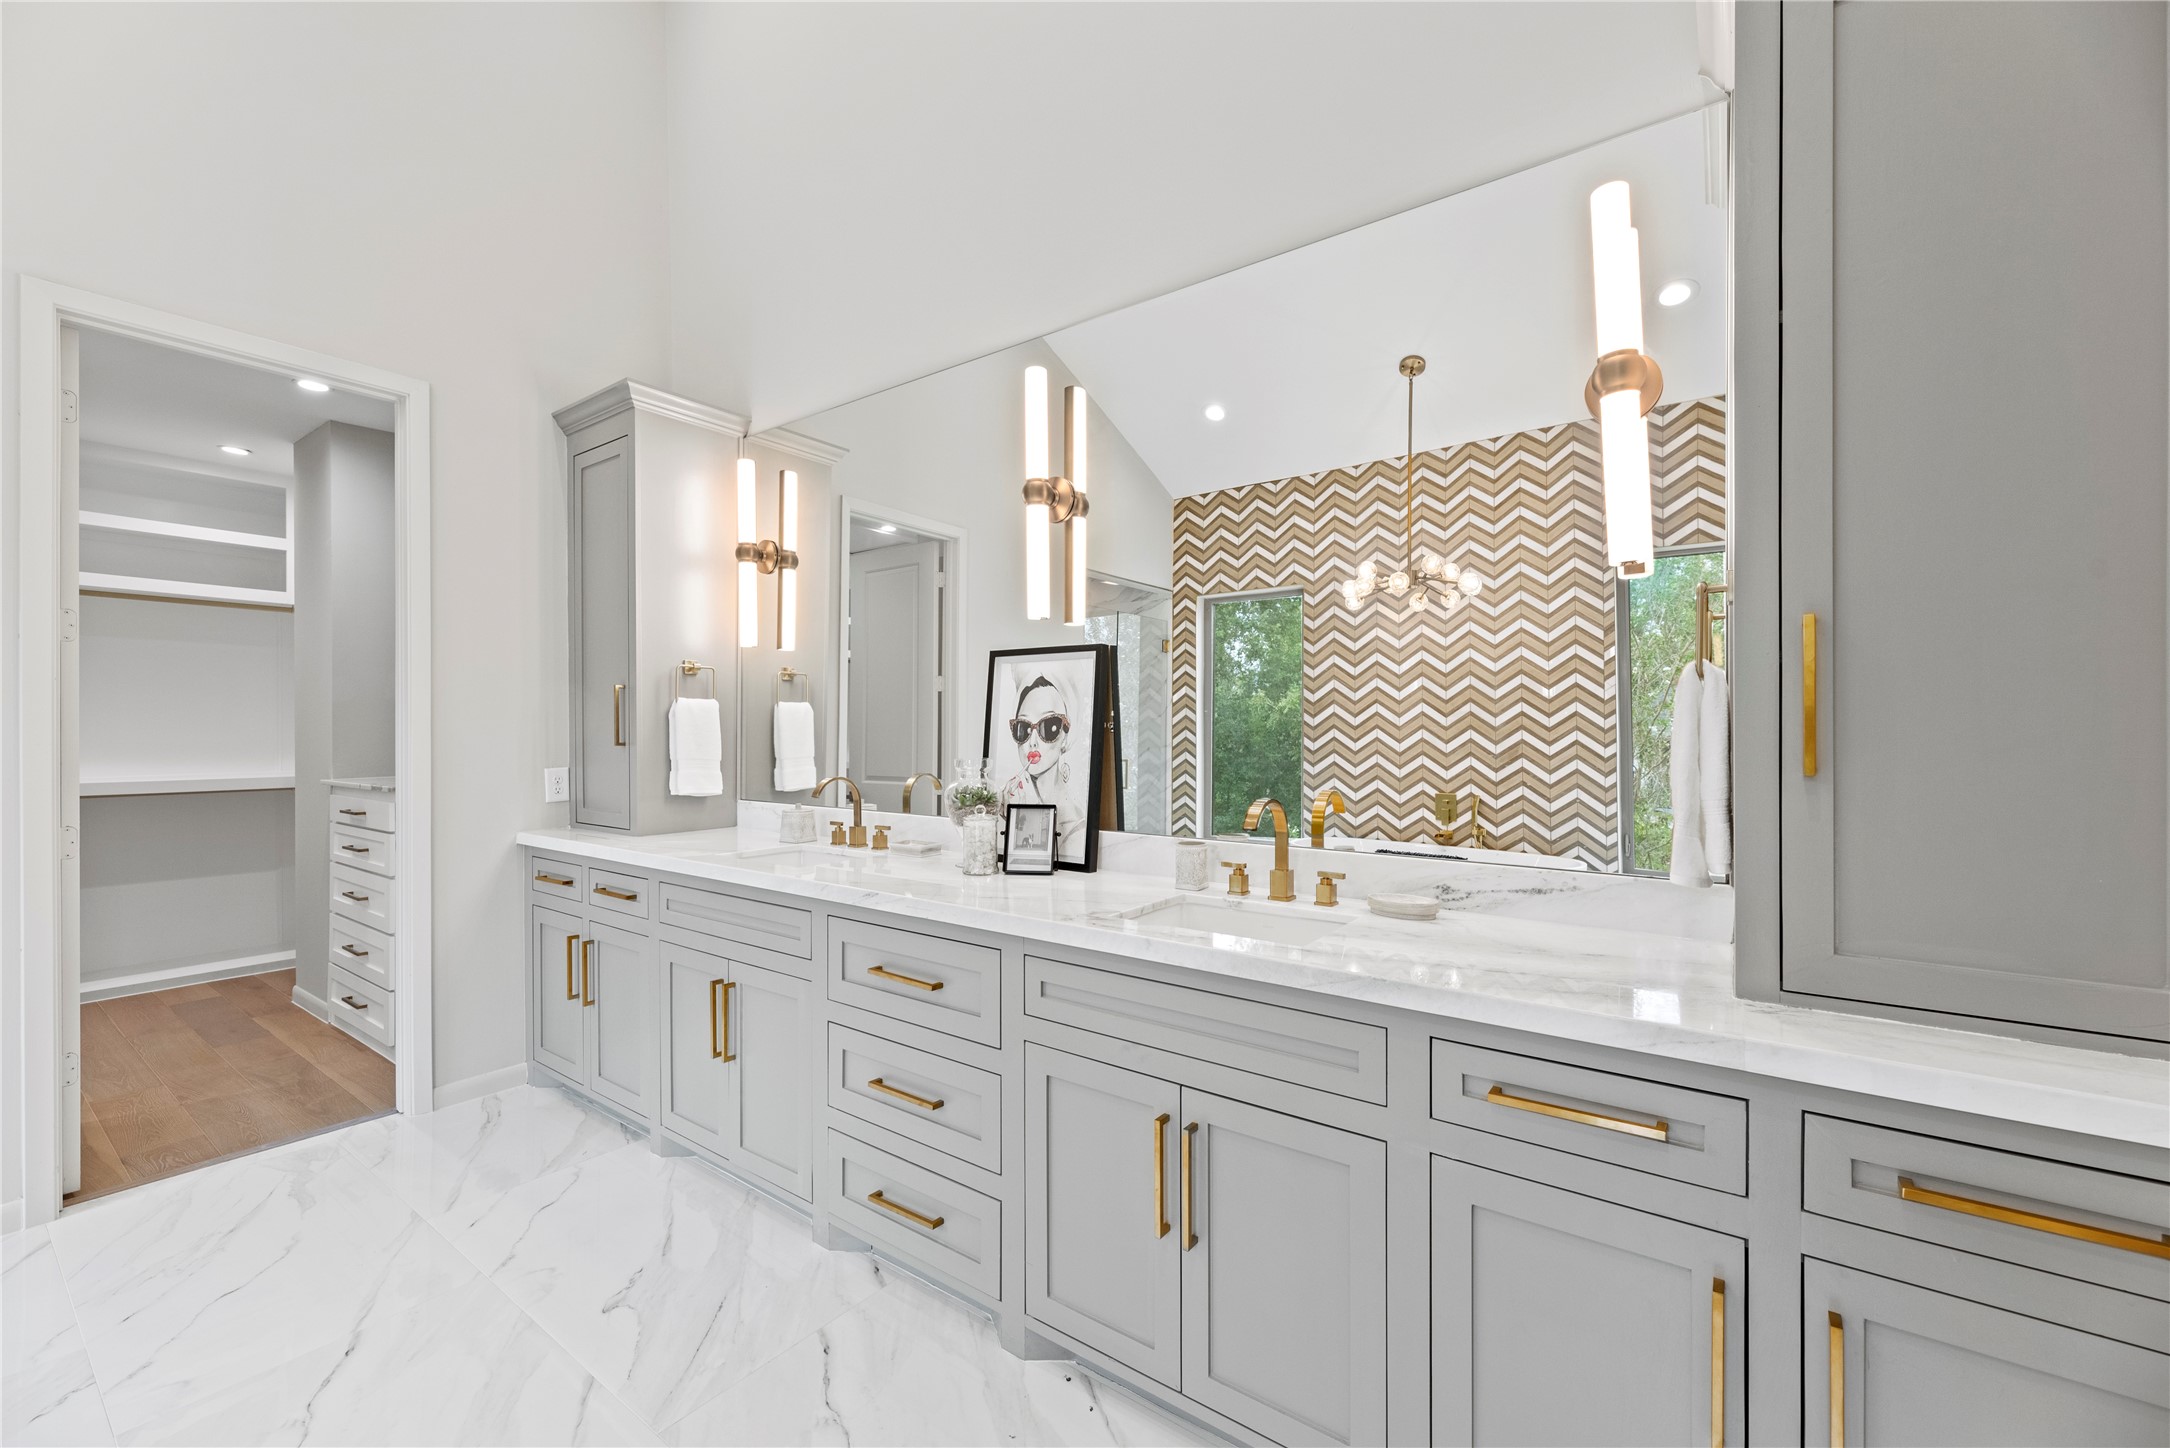 The 3rd floor PRIMARY BATH (approx 13.5X13.6) features quartz counter, custom cabinets, brushed bass fixtures, custom sconces & lighting, two sinks, two walk-in closets (only one shown), a separate shower and tub.